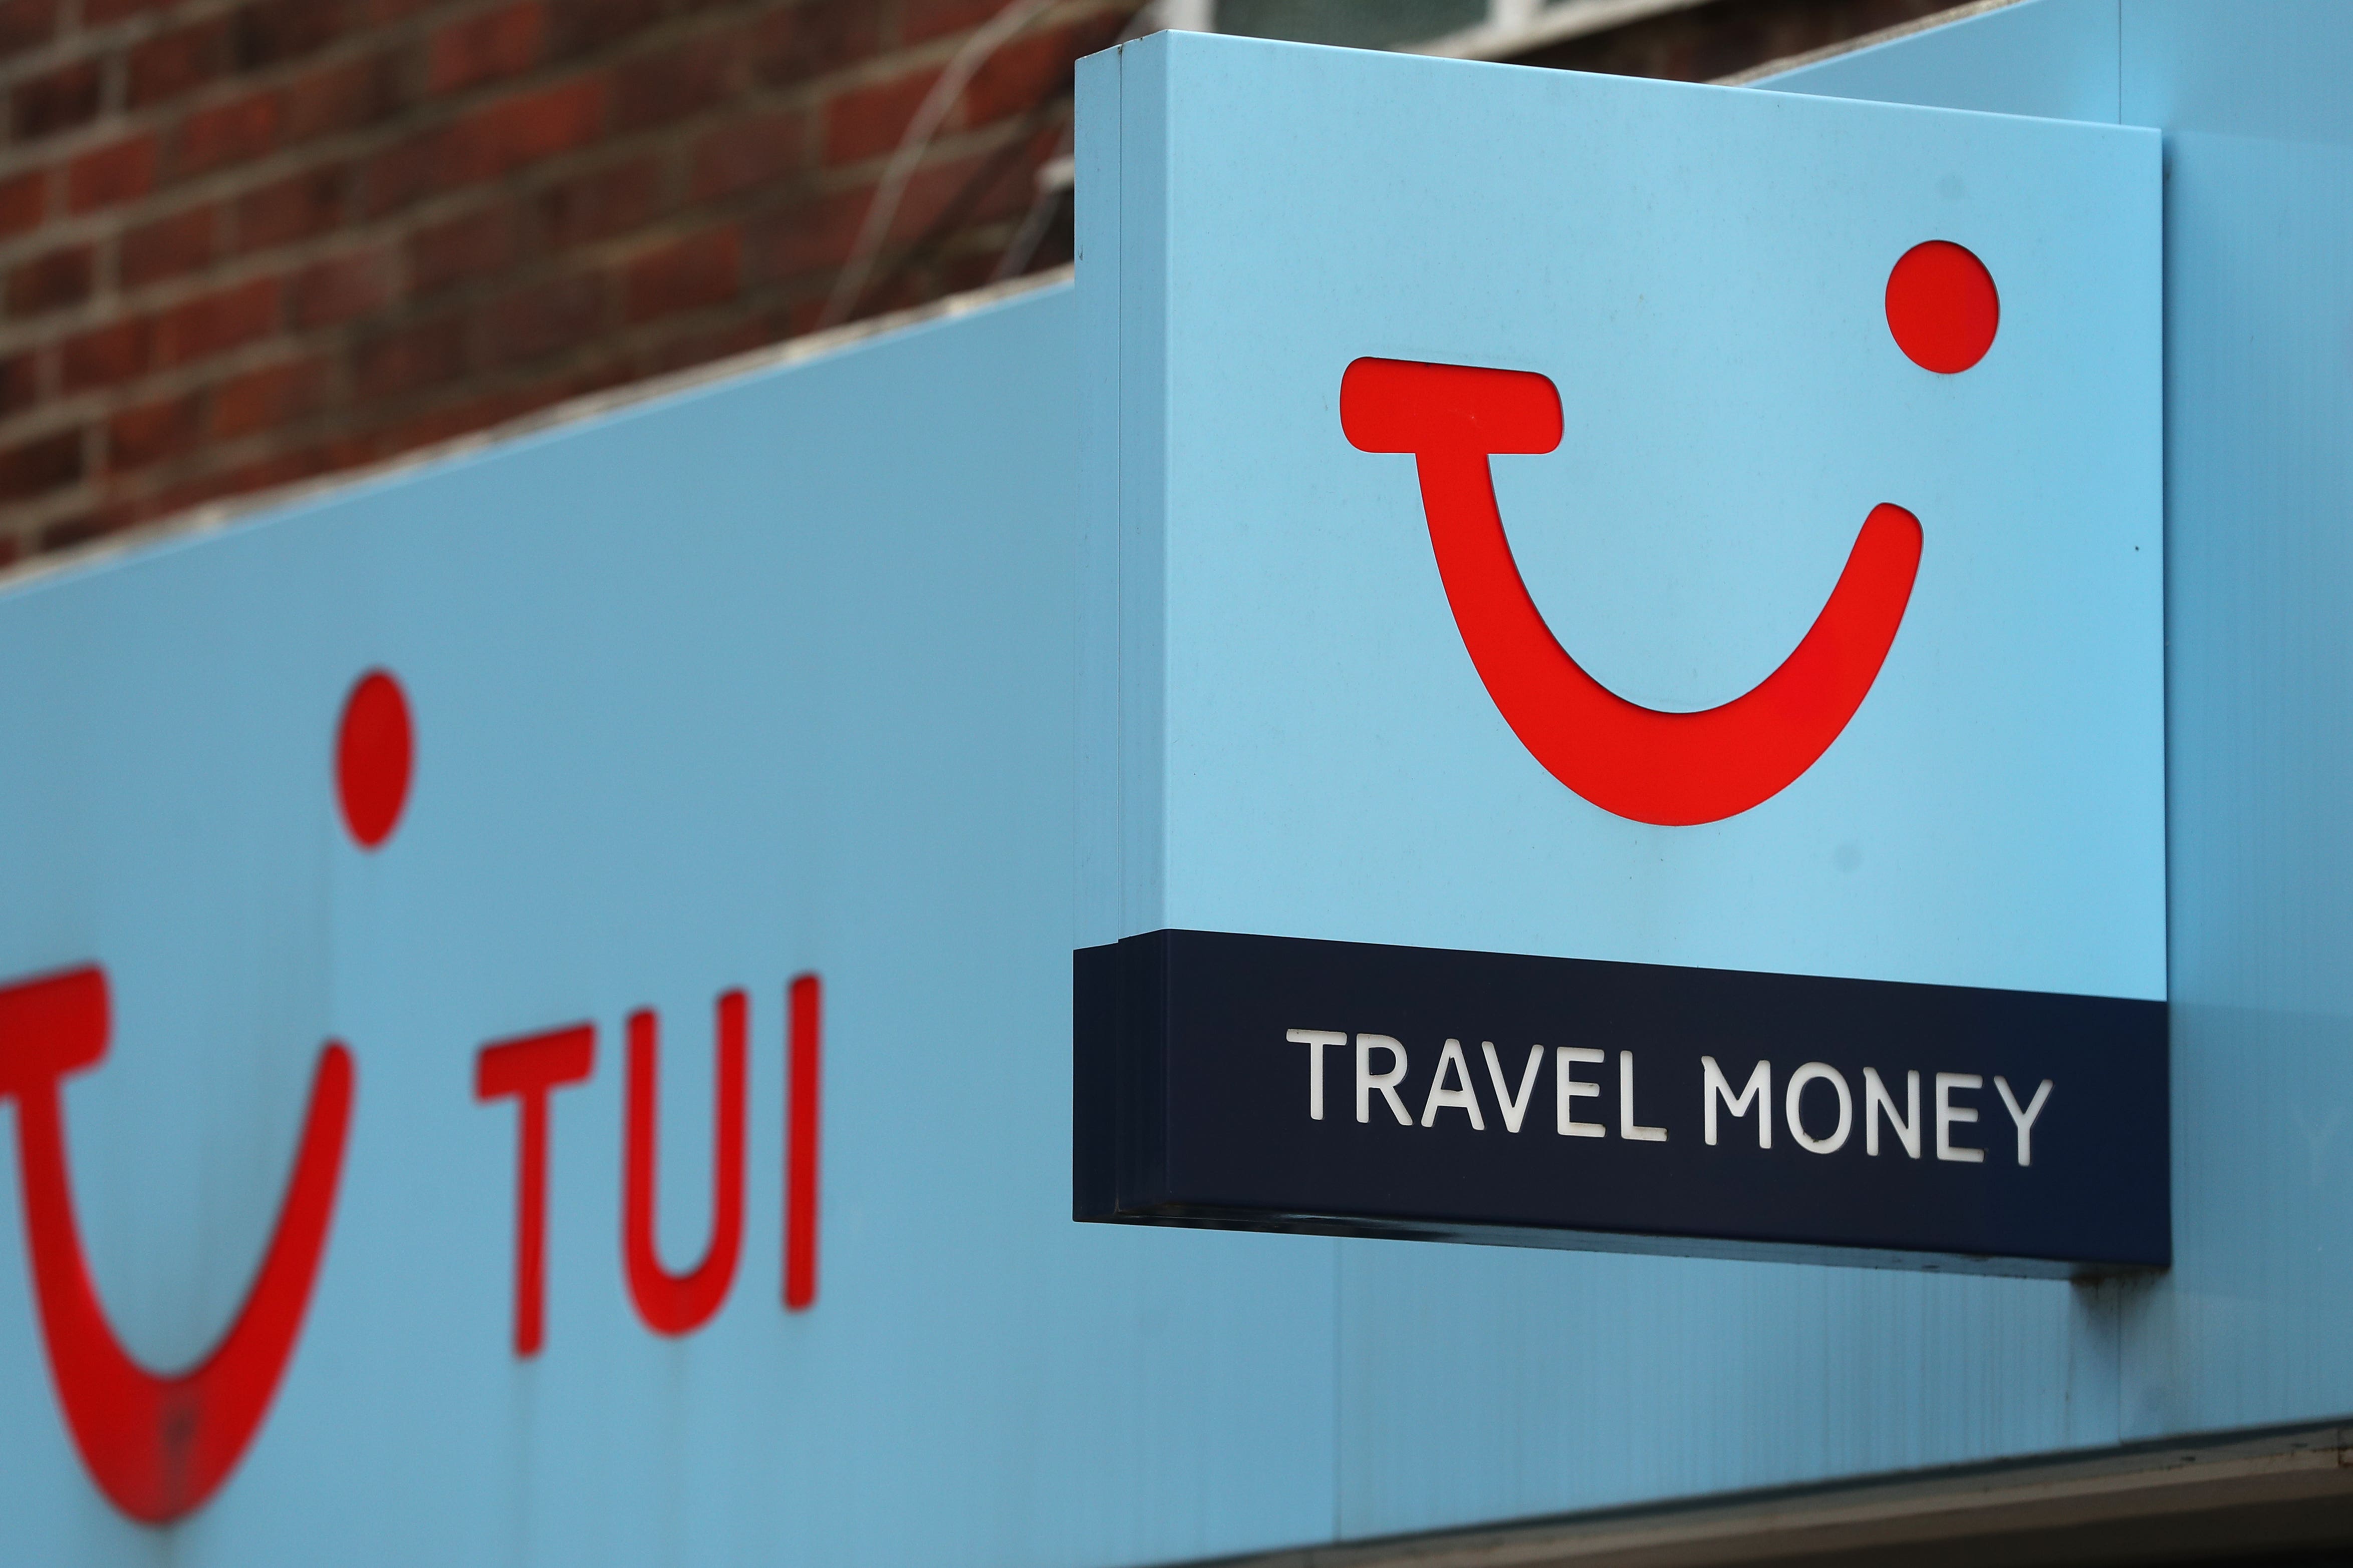 TUI confirmed that a component on one of its aircraft supplied by AOG Technics has been removed